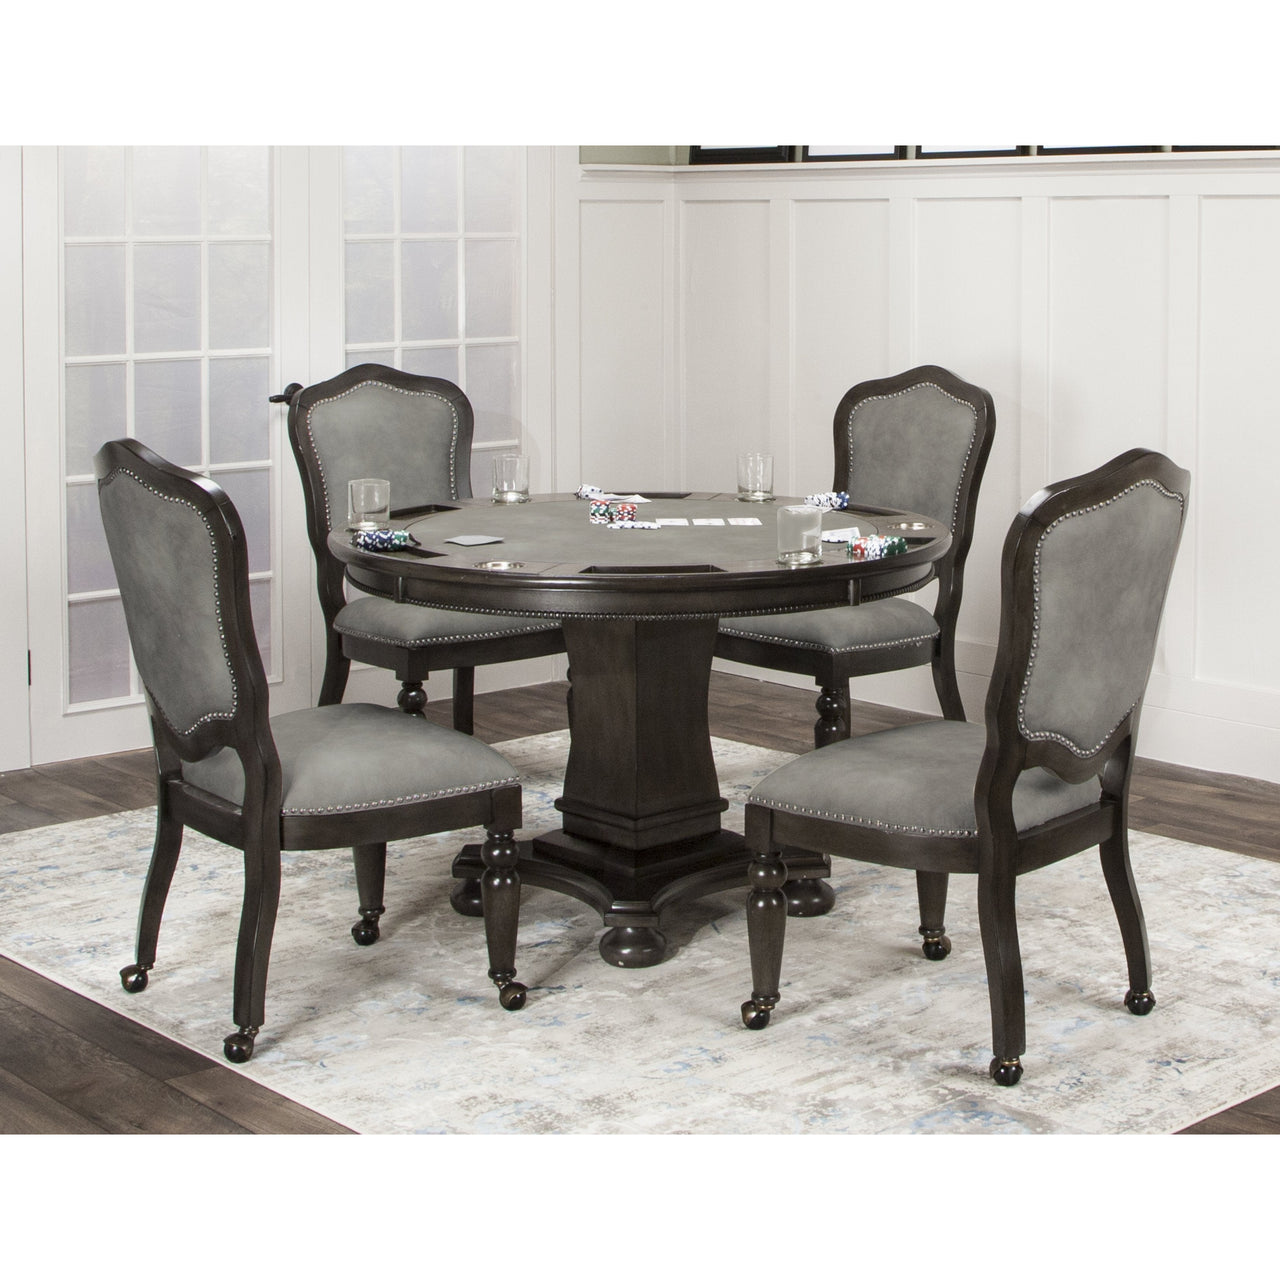 Convertible Poker & Dining Table Set Vegas With 4 matching chairs-AMERICANA-POKER-TABLES